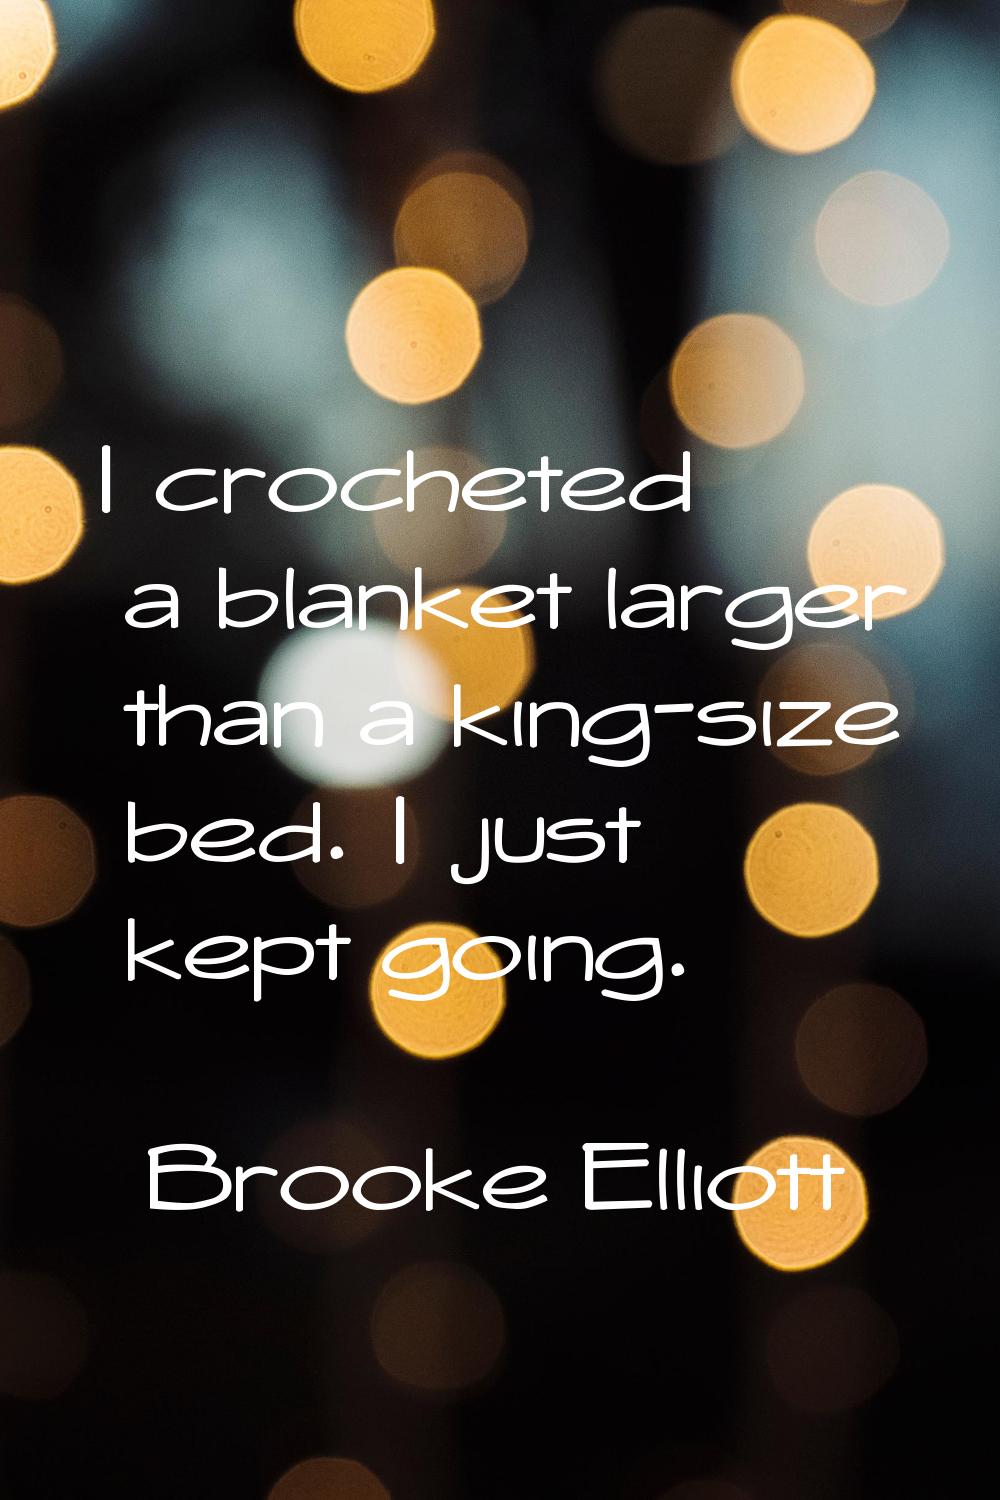 I crocheted a blanket larger than a king-size bed. I just kept going.